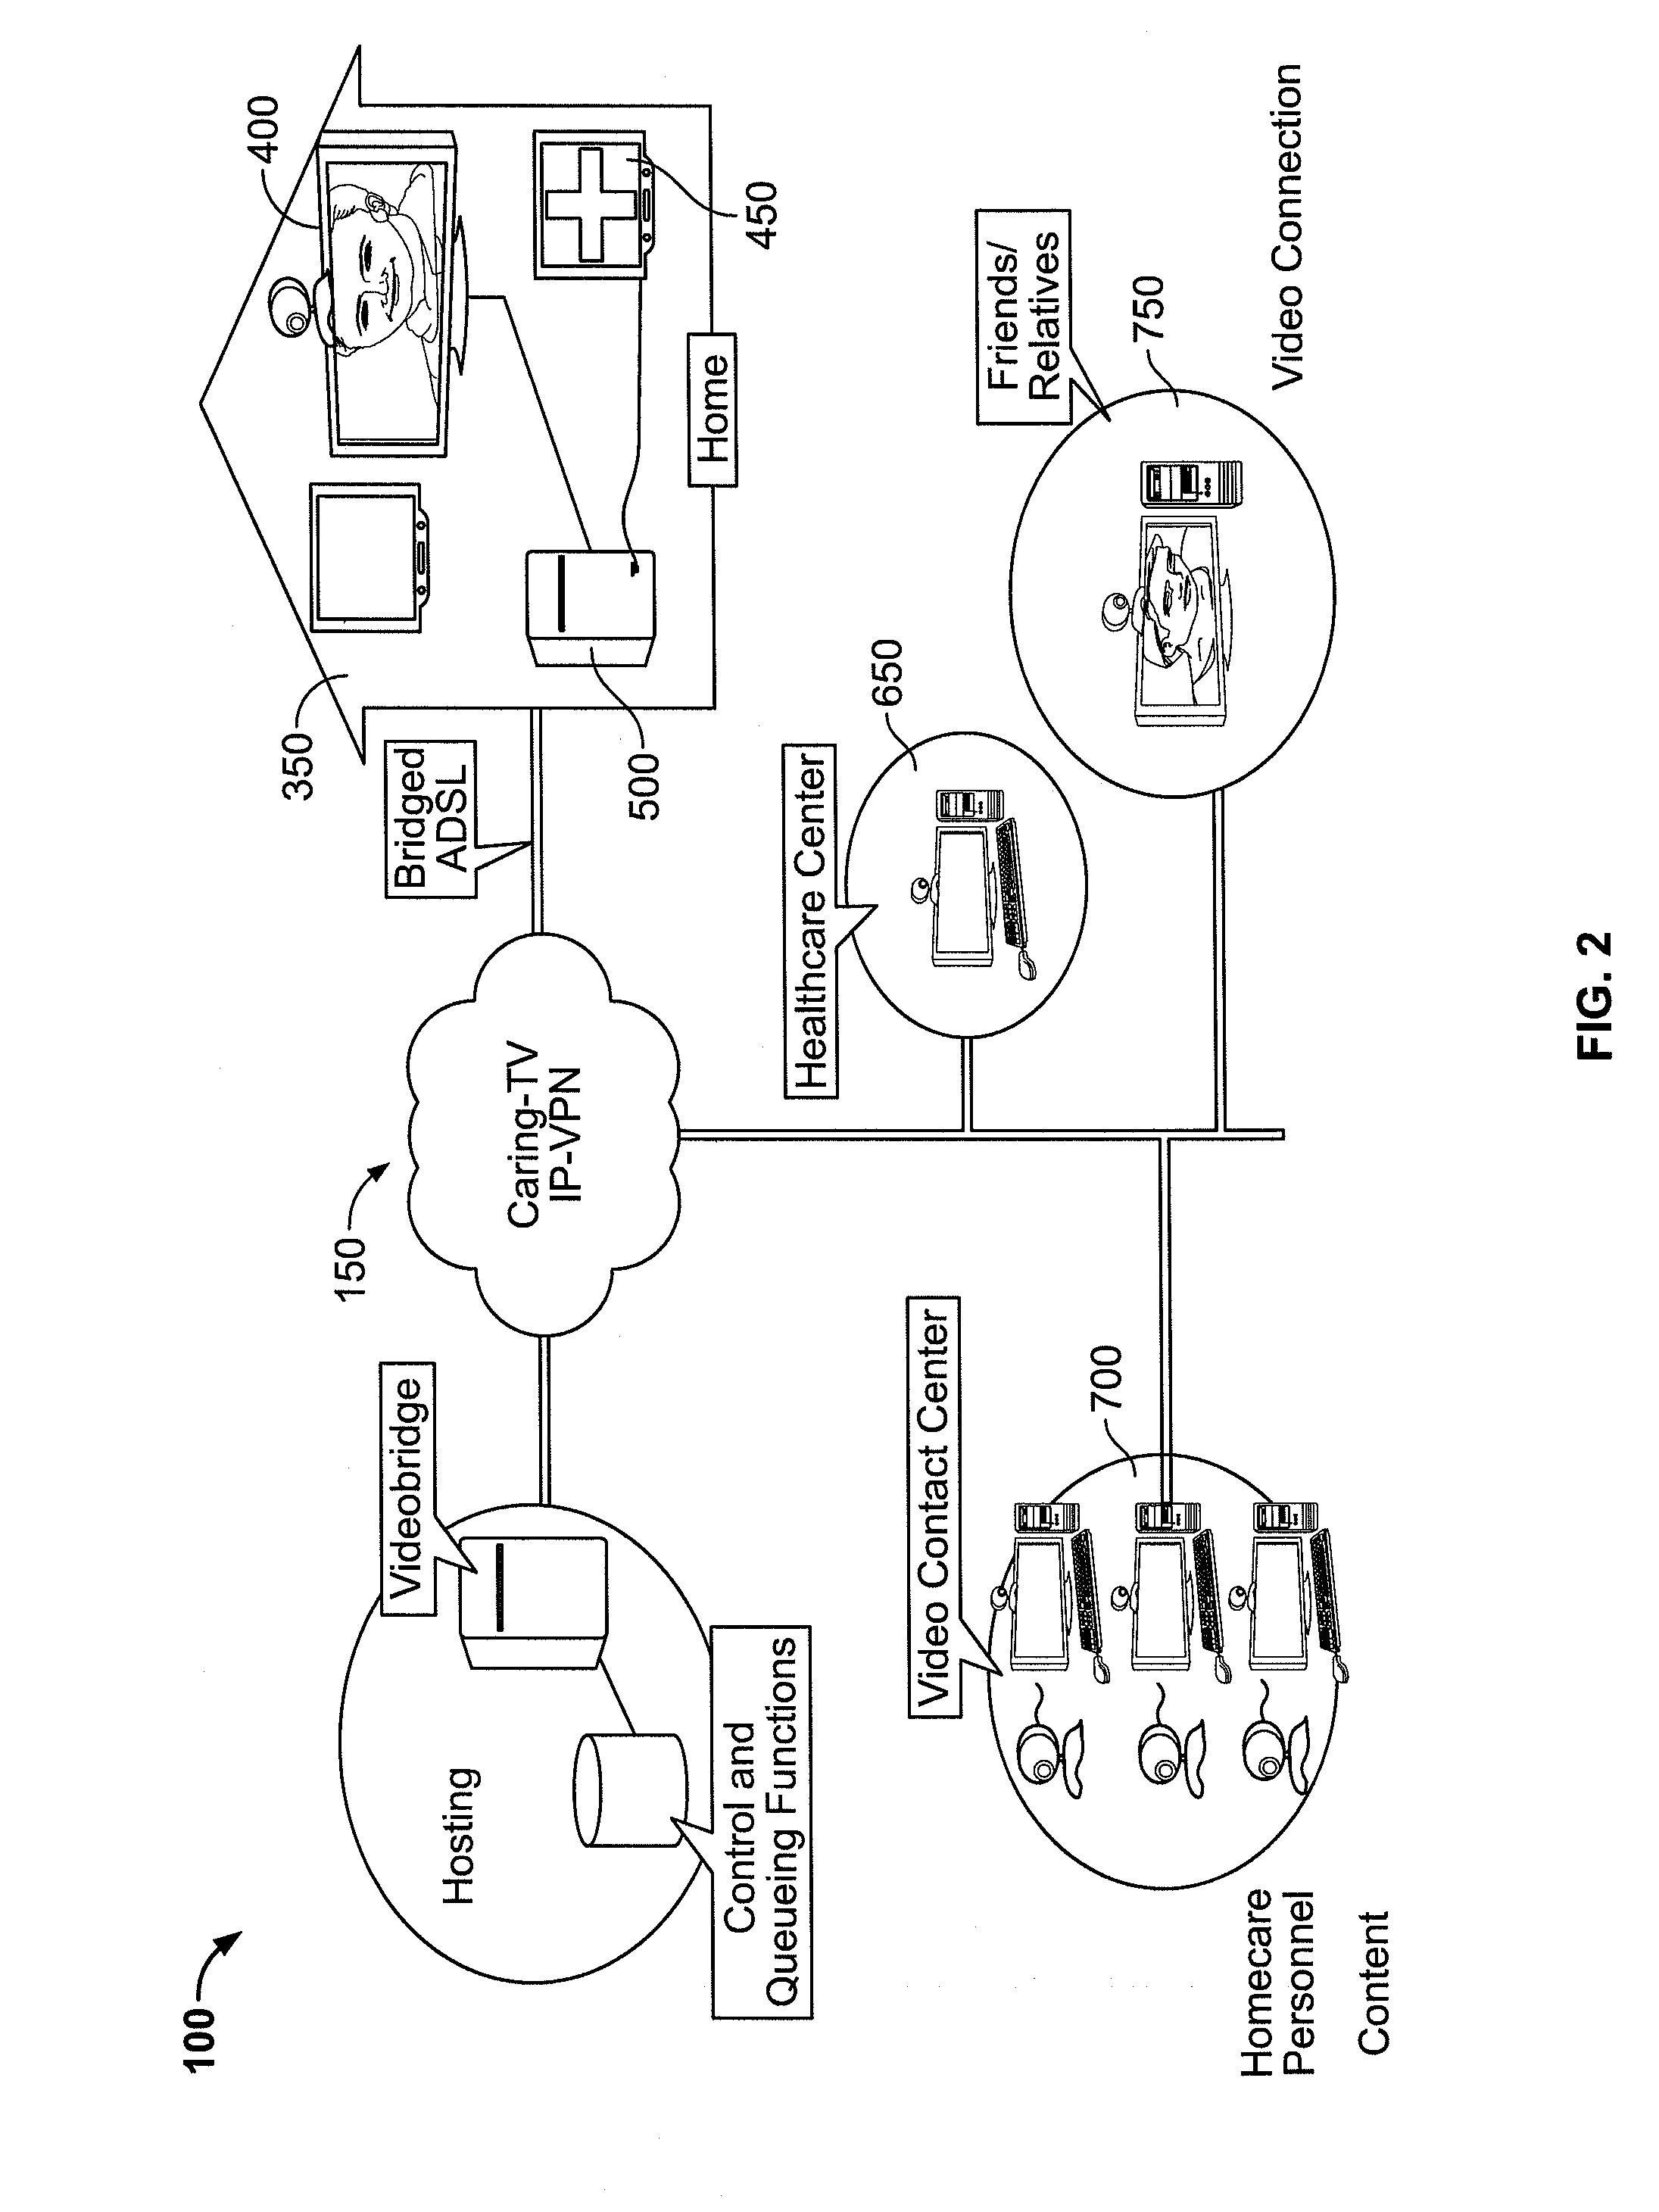 System and Method for Providing Health Care Services